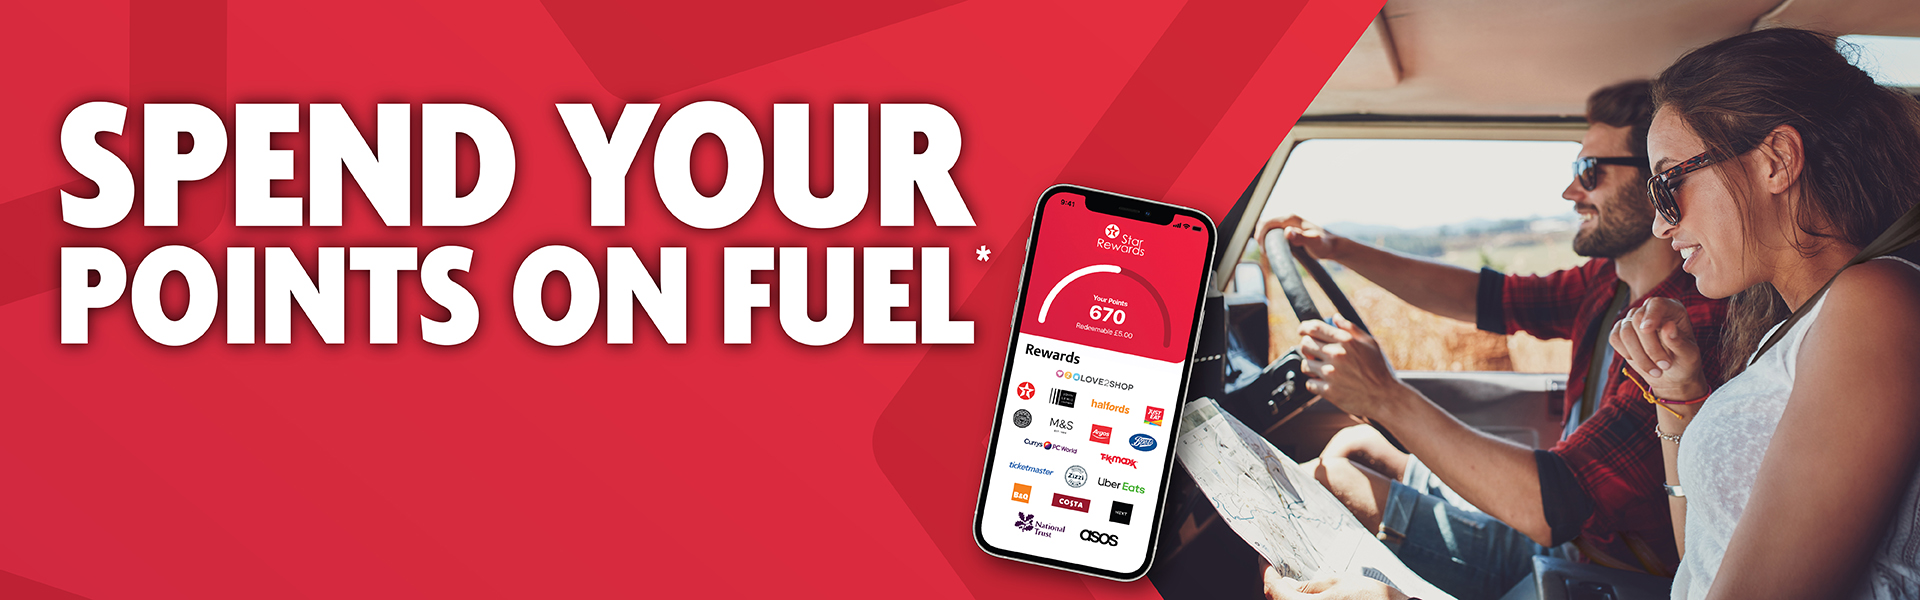 Spend your Points on fuel*